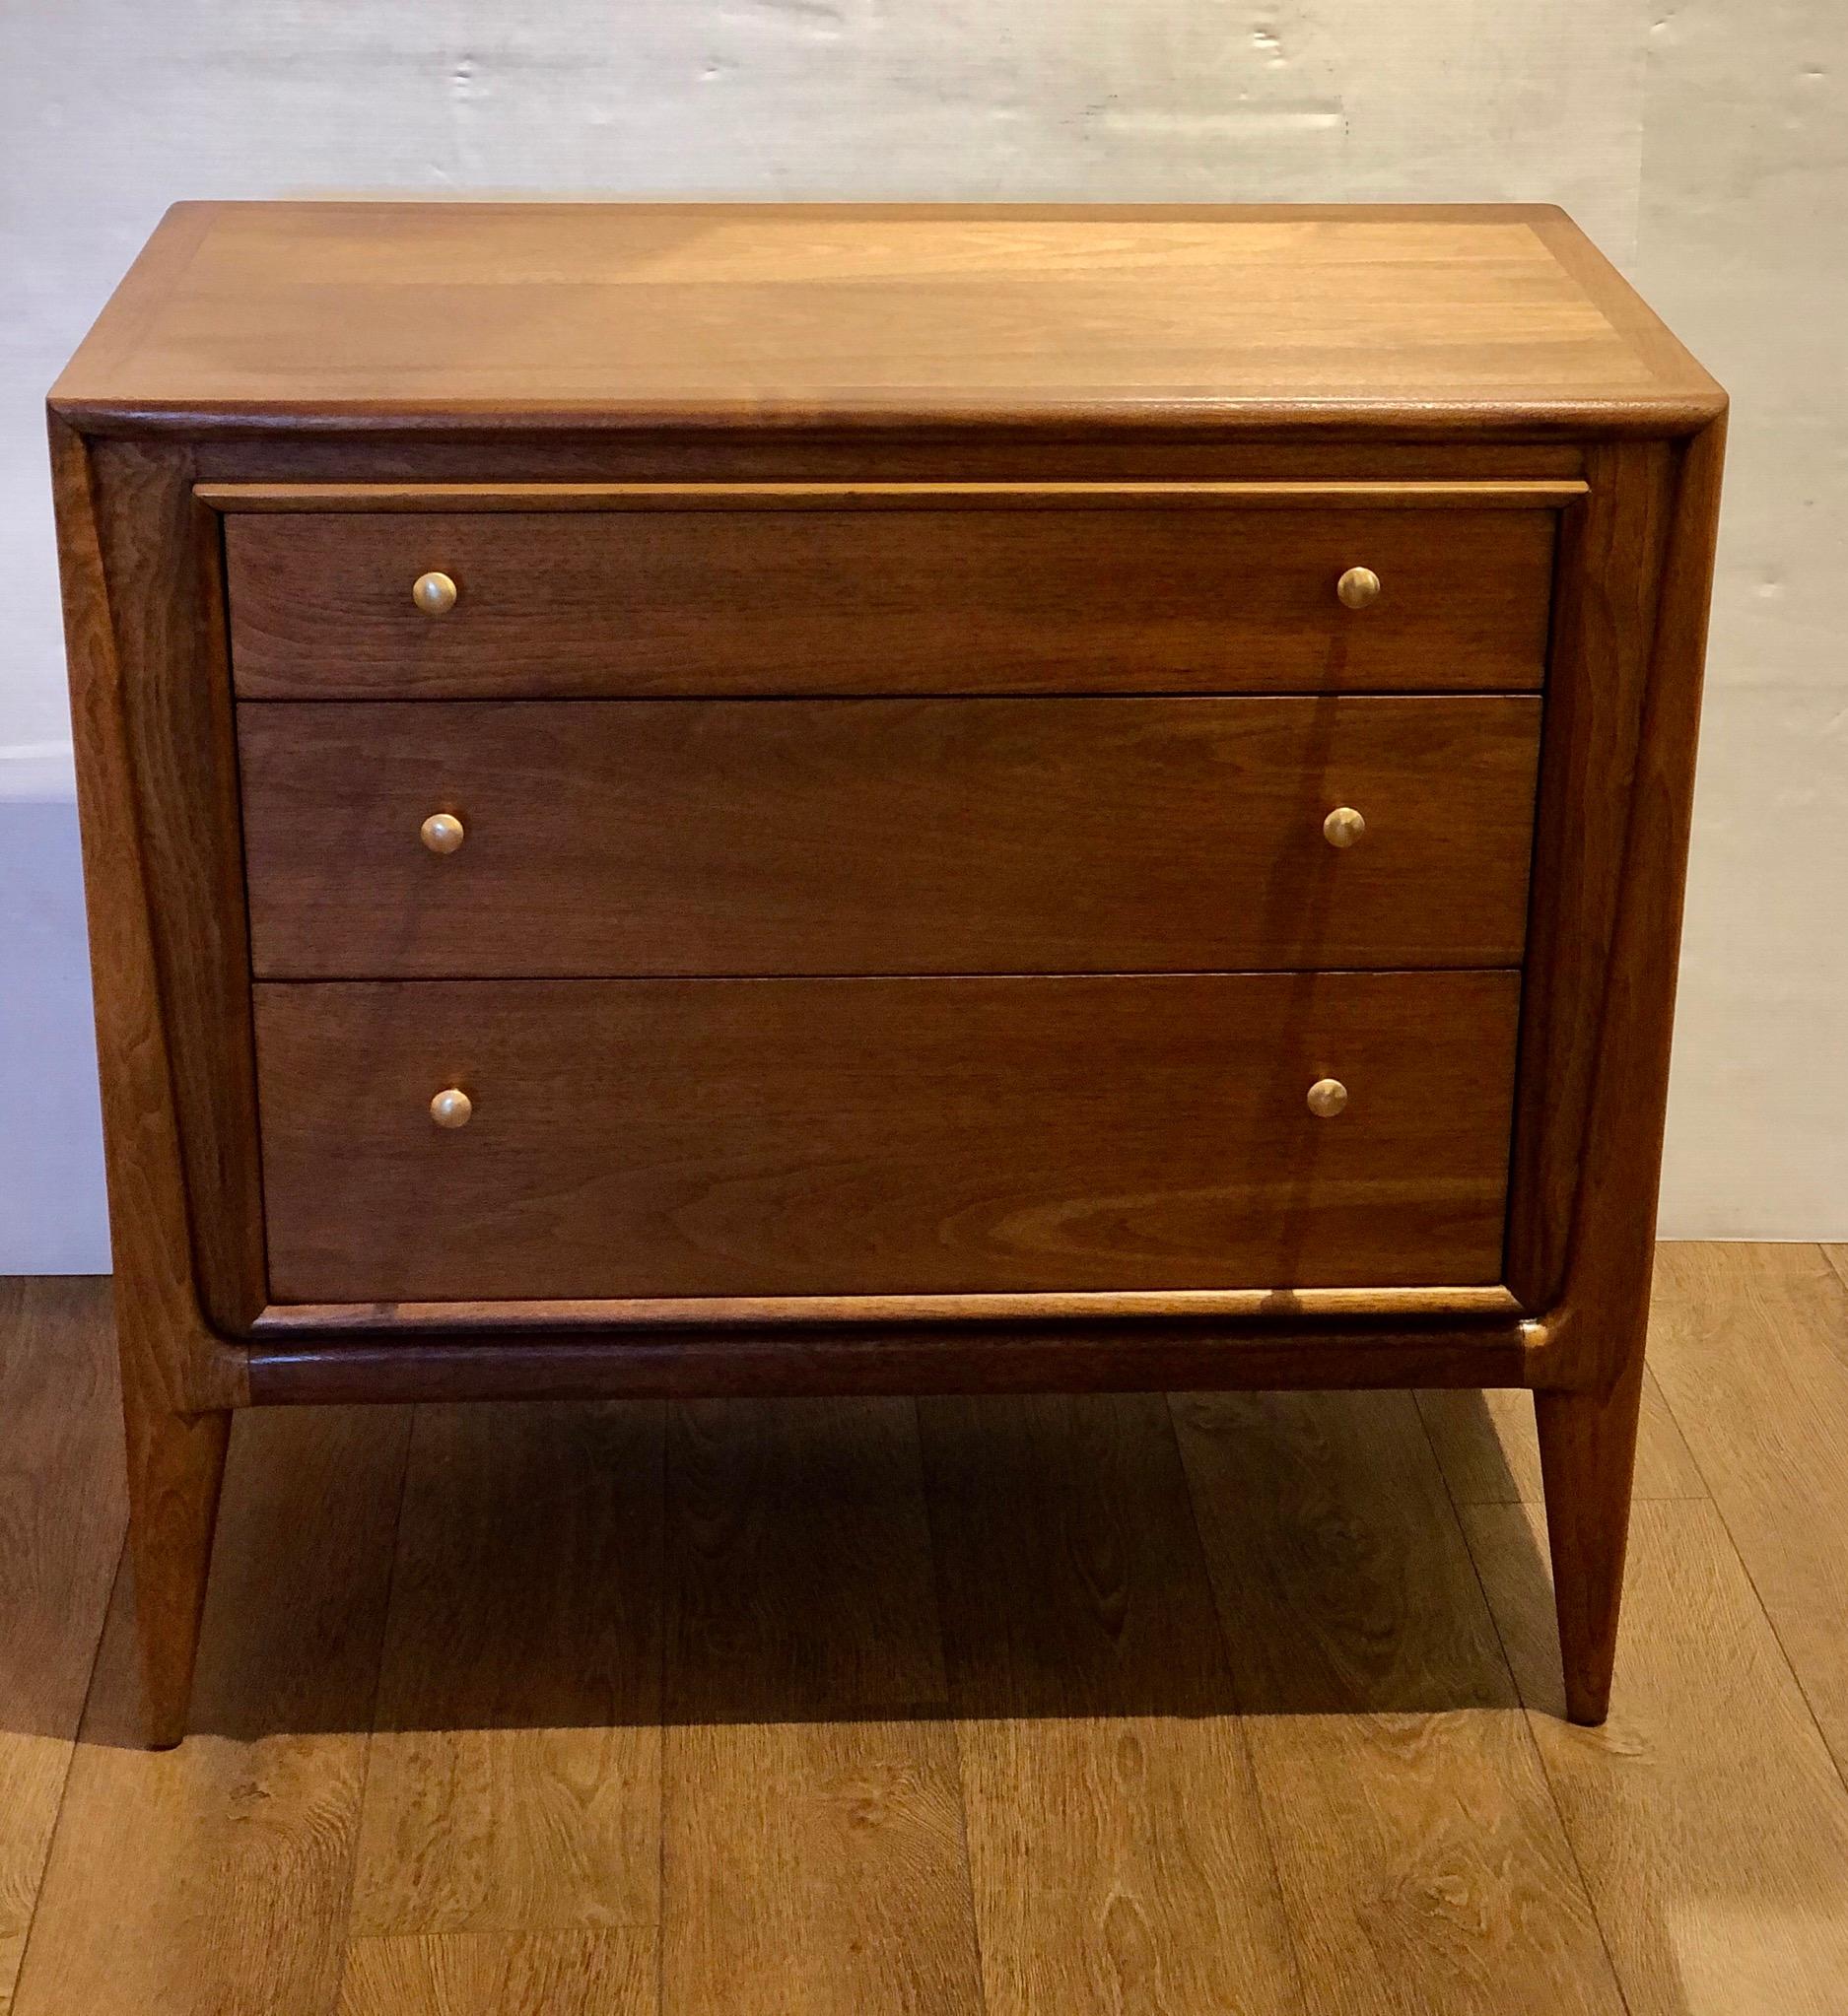 Beautiful simple elegant small dresser by John Stuart, circa 1960s freshly refinished with brass polished handles.